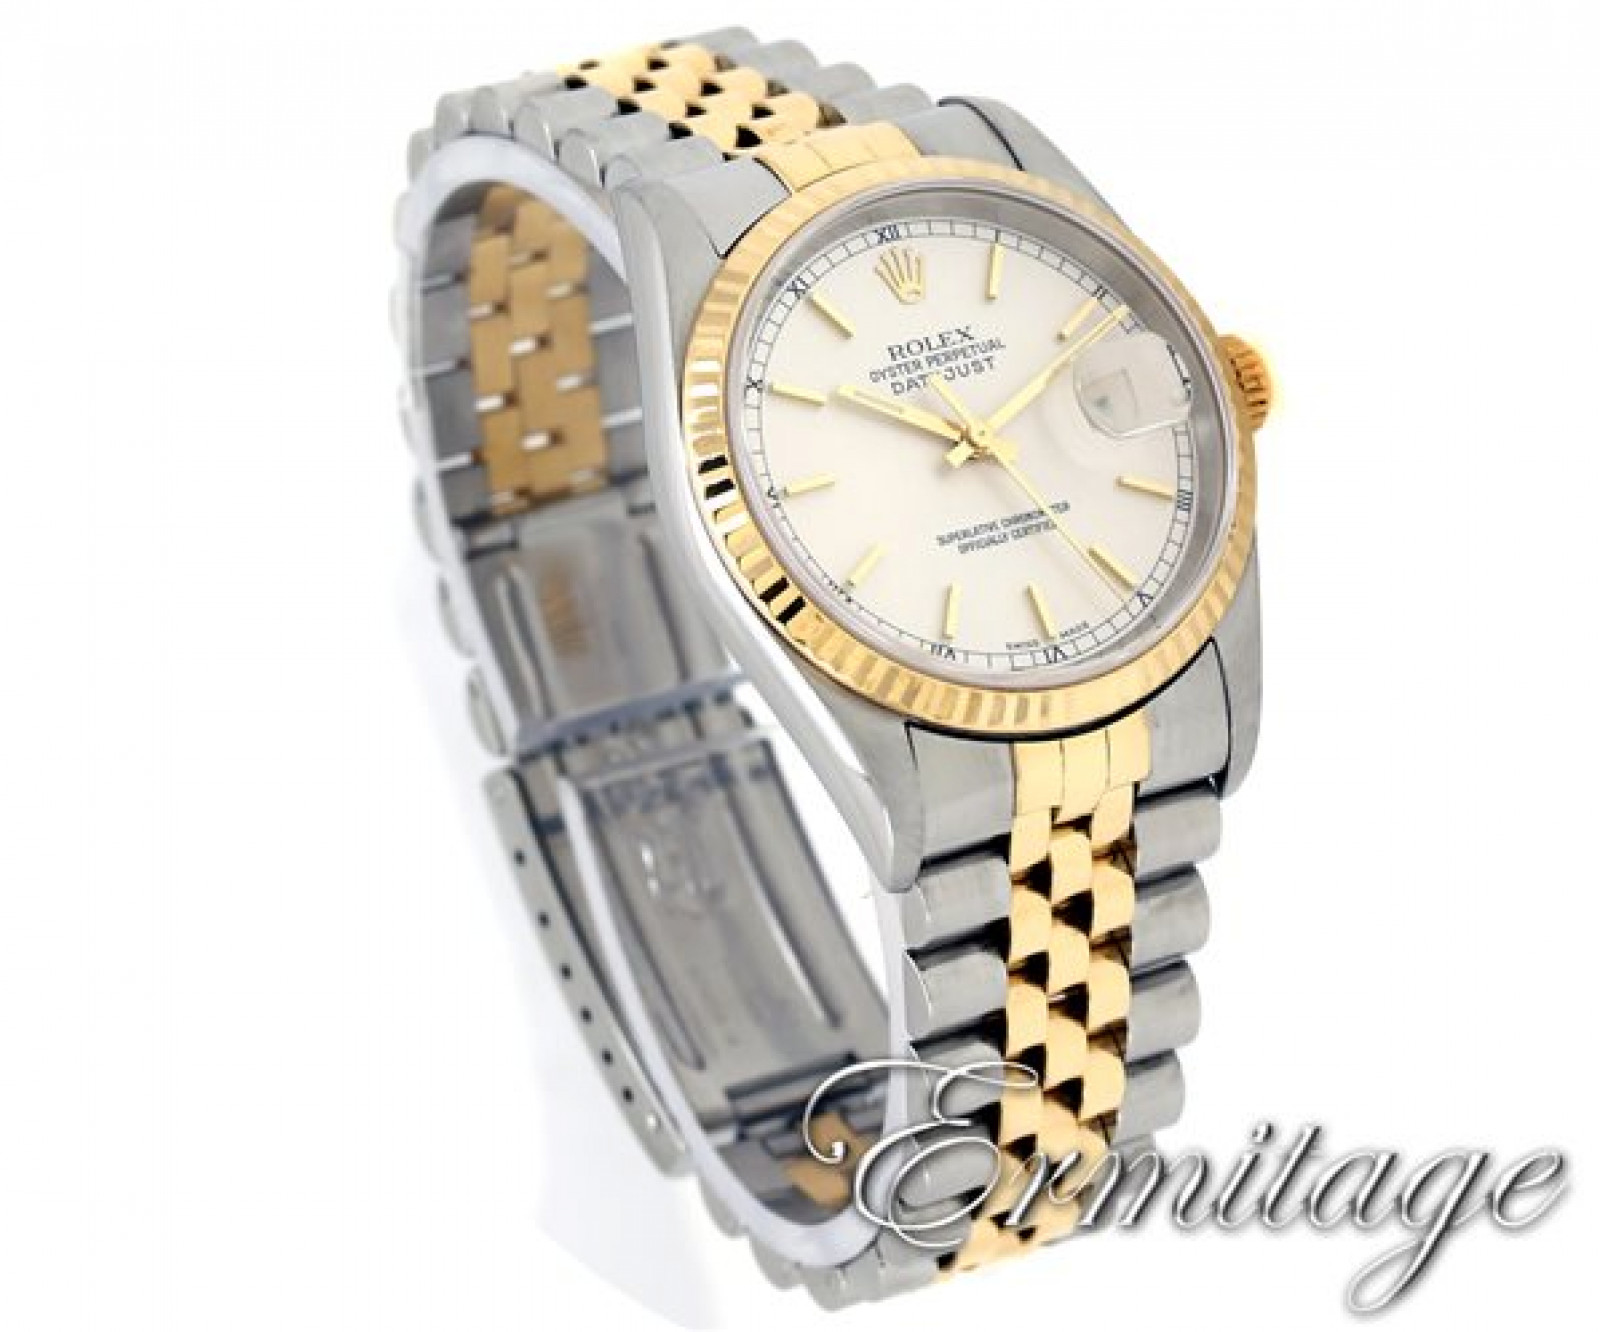 Rolex Datejust 16233 Yellow Gold & Stainless Steel